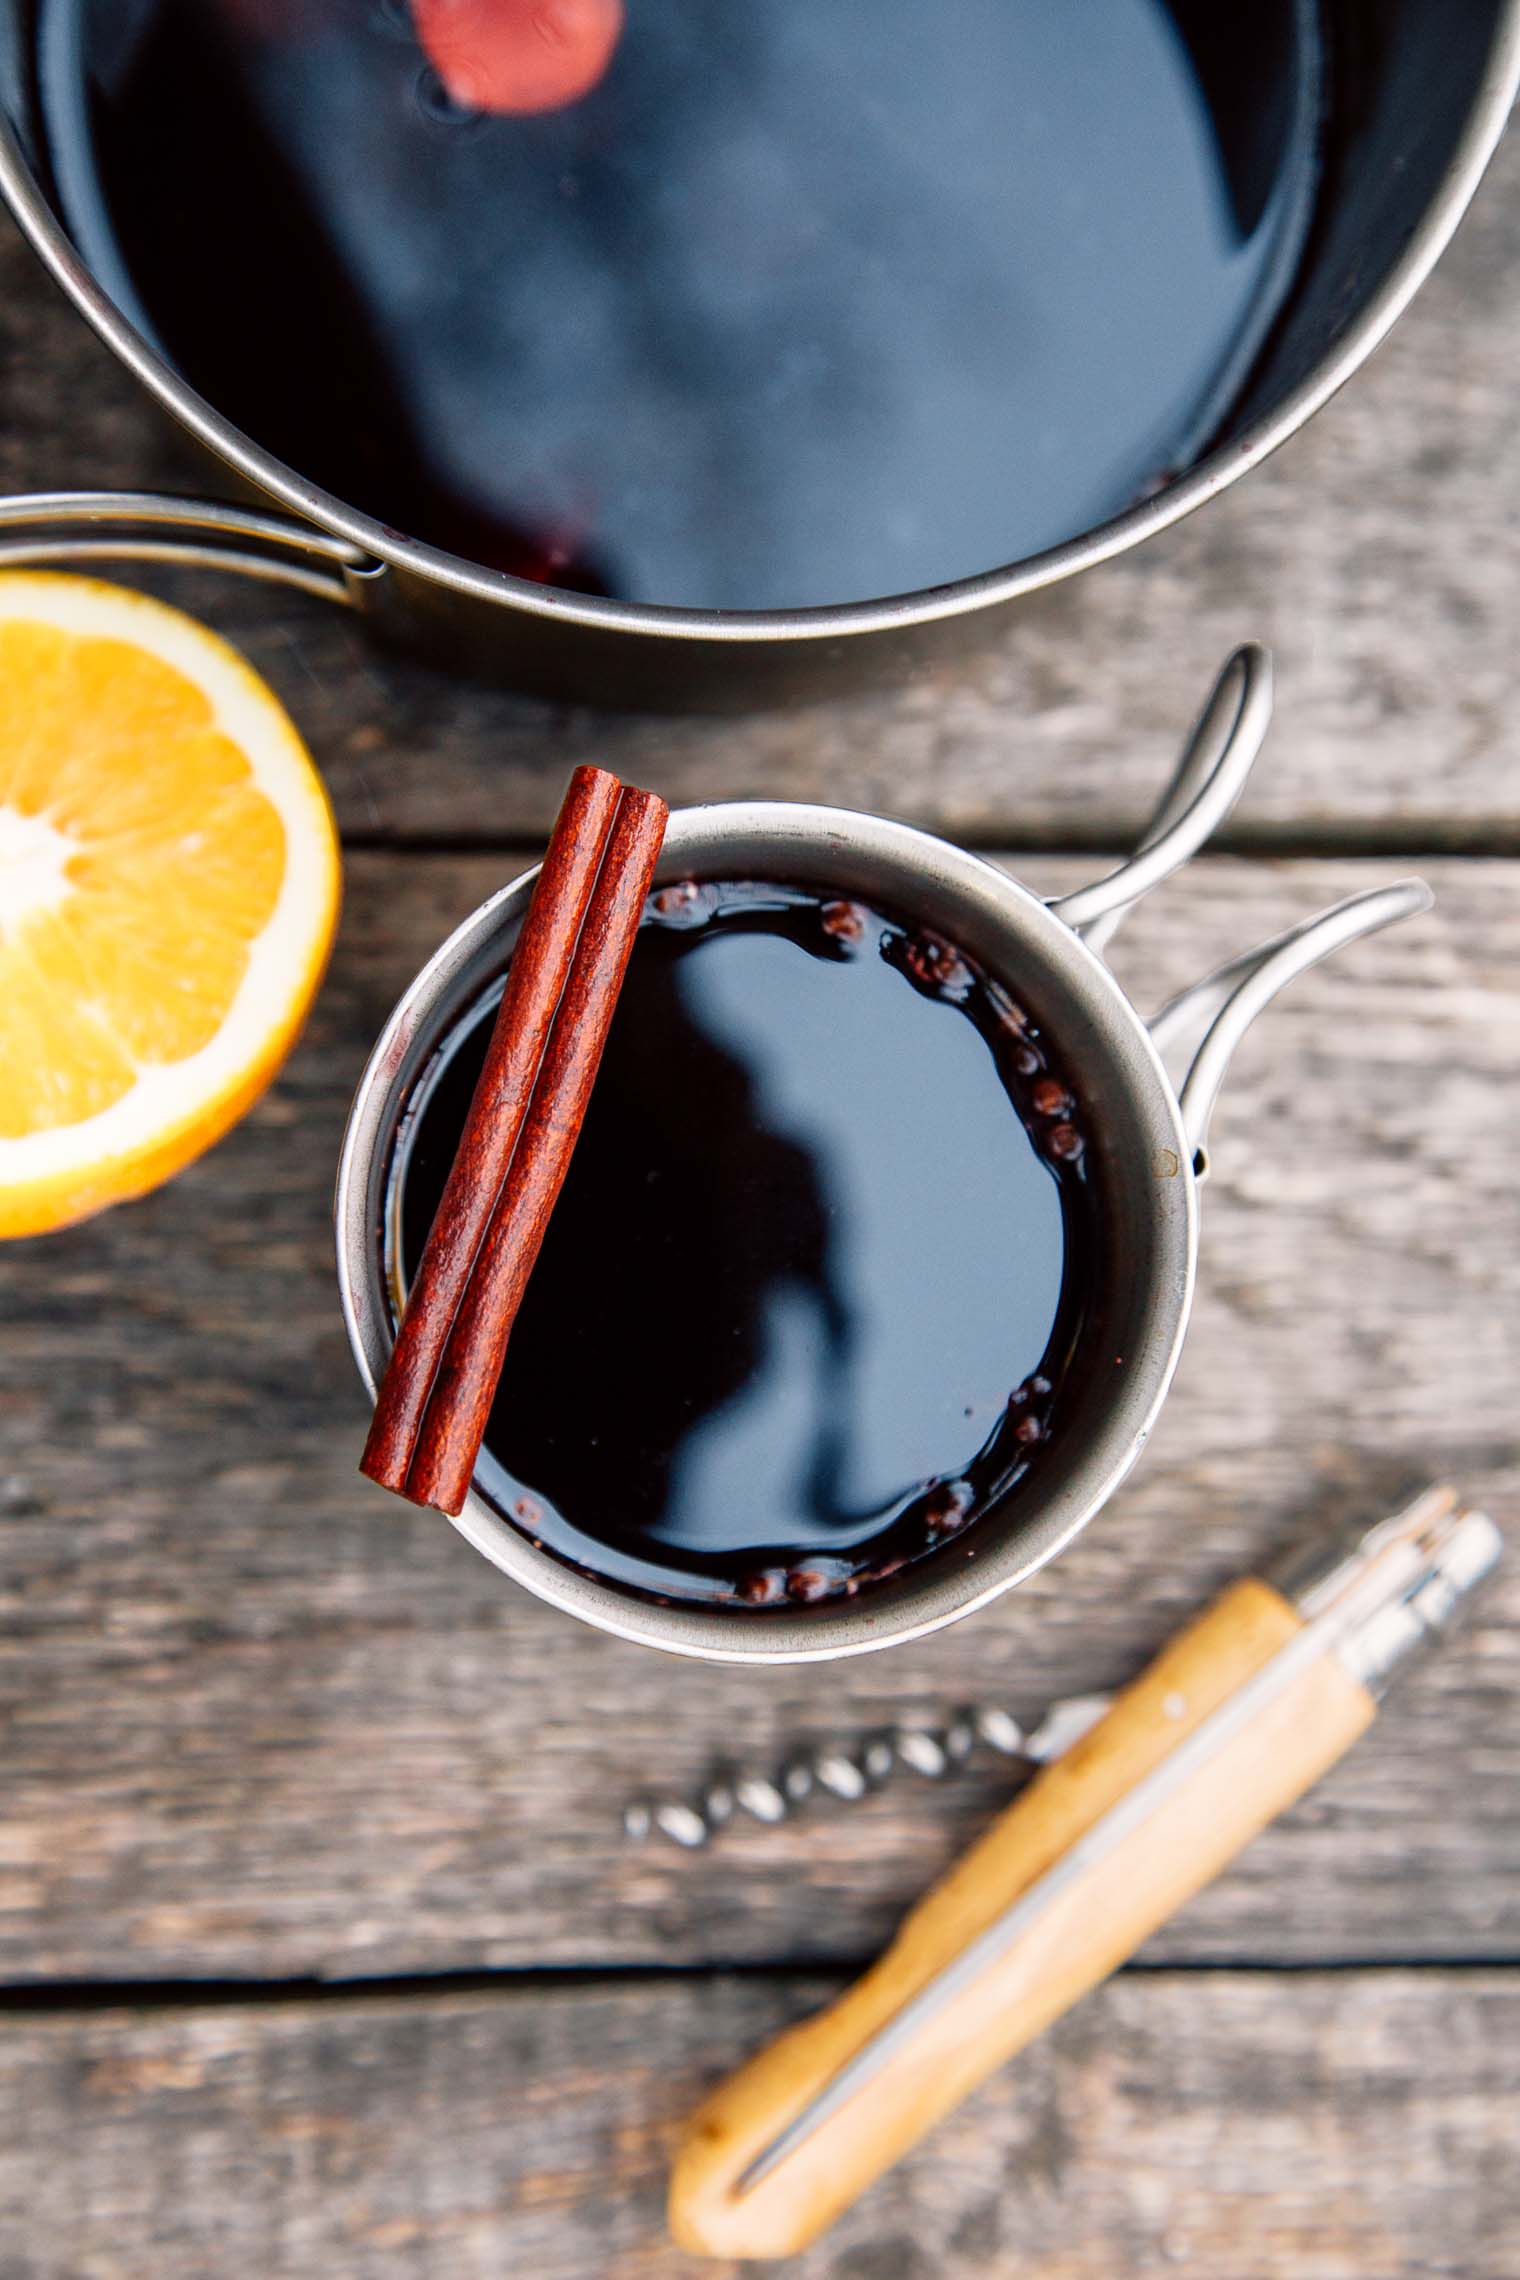 A mug and pot full of mulled wine on a camping table